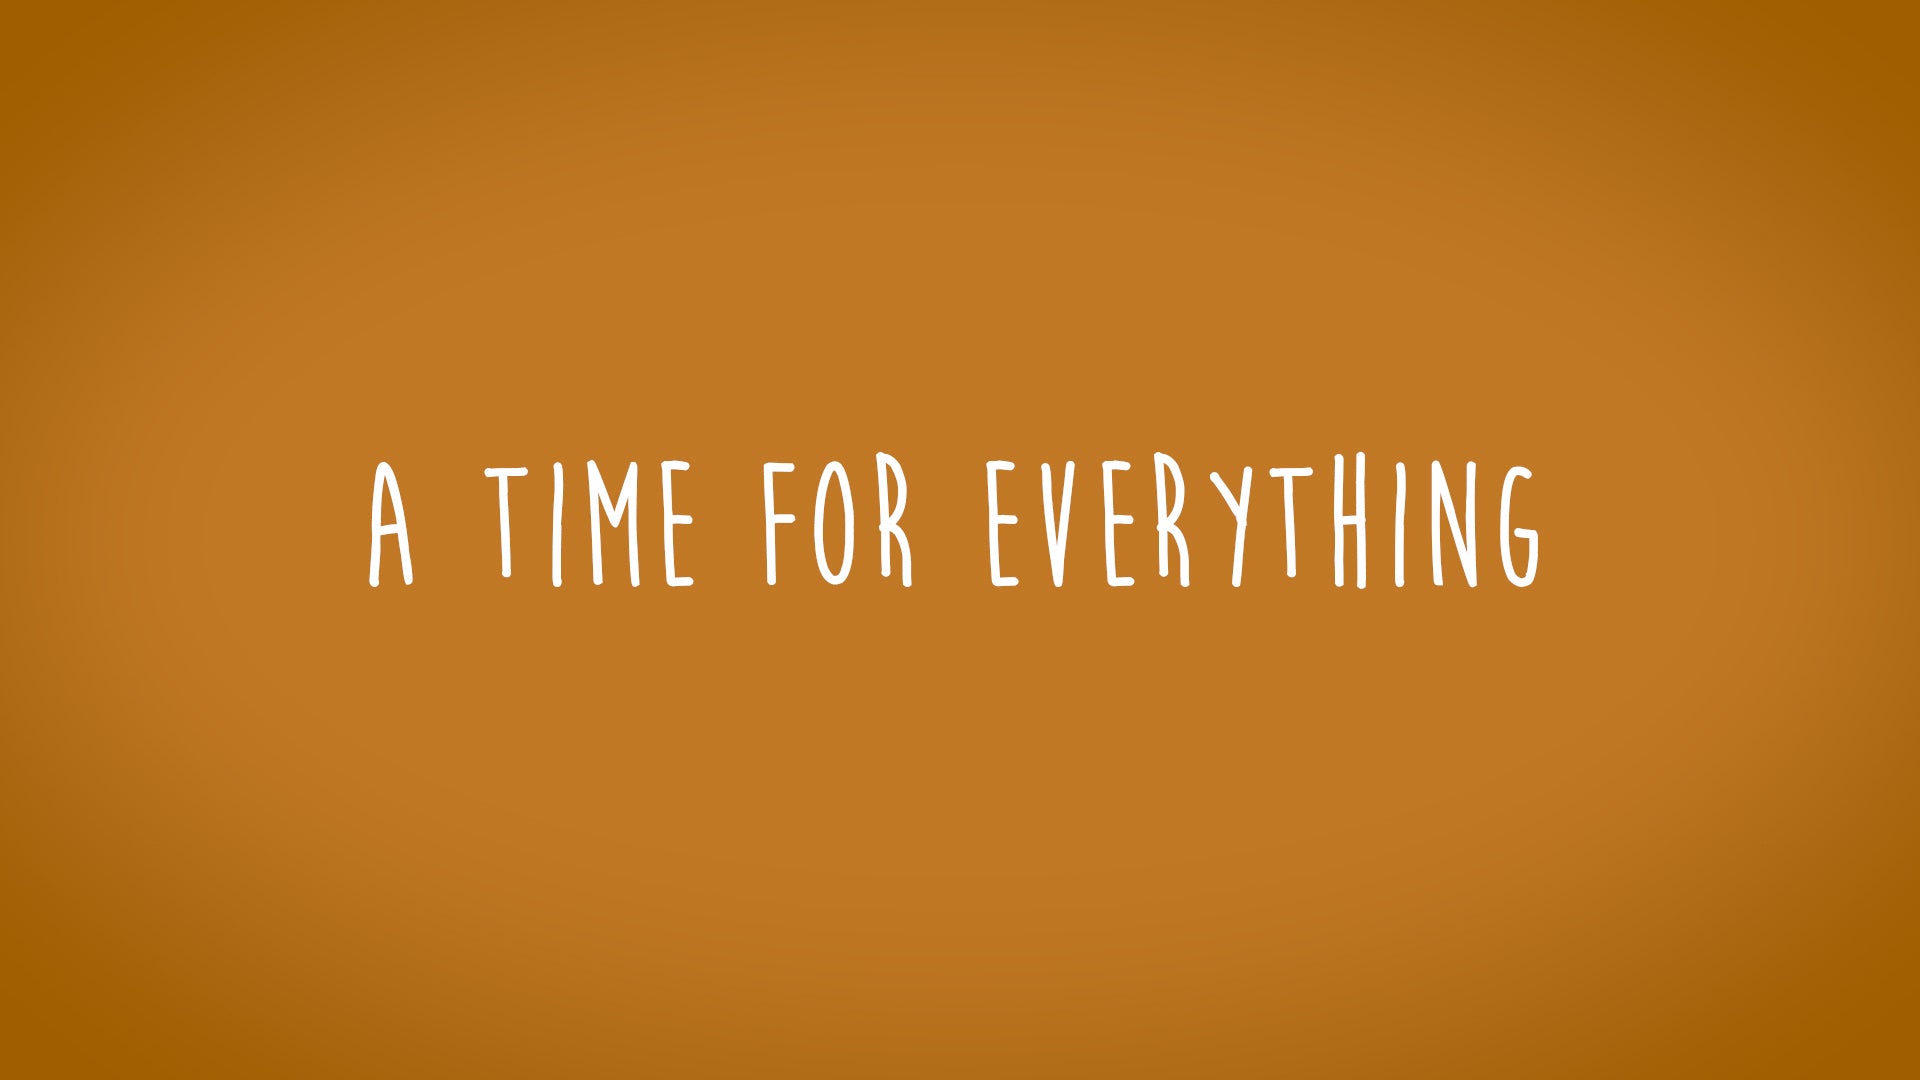 Mini Movie / A Time For Everything